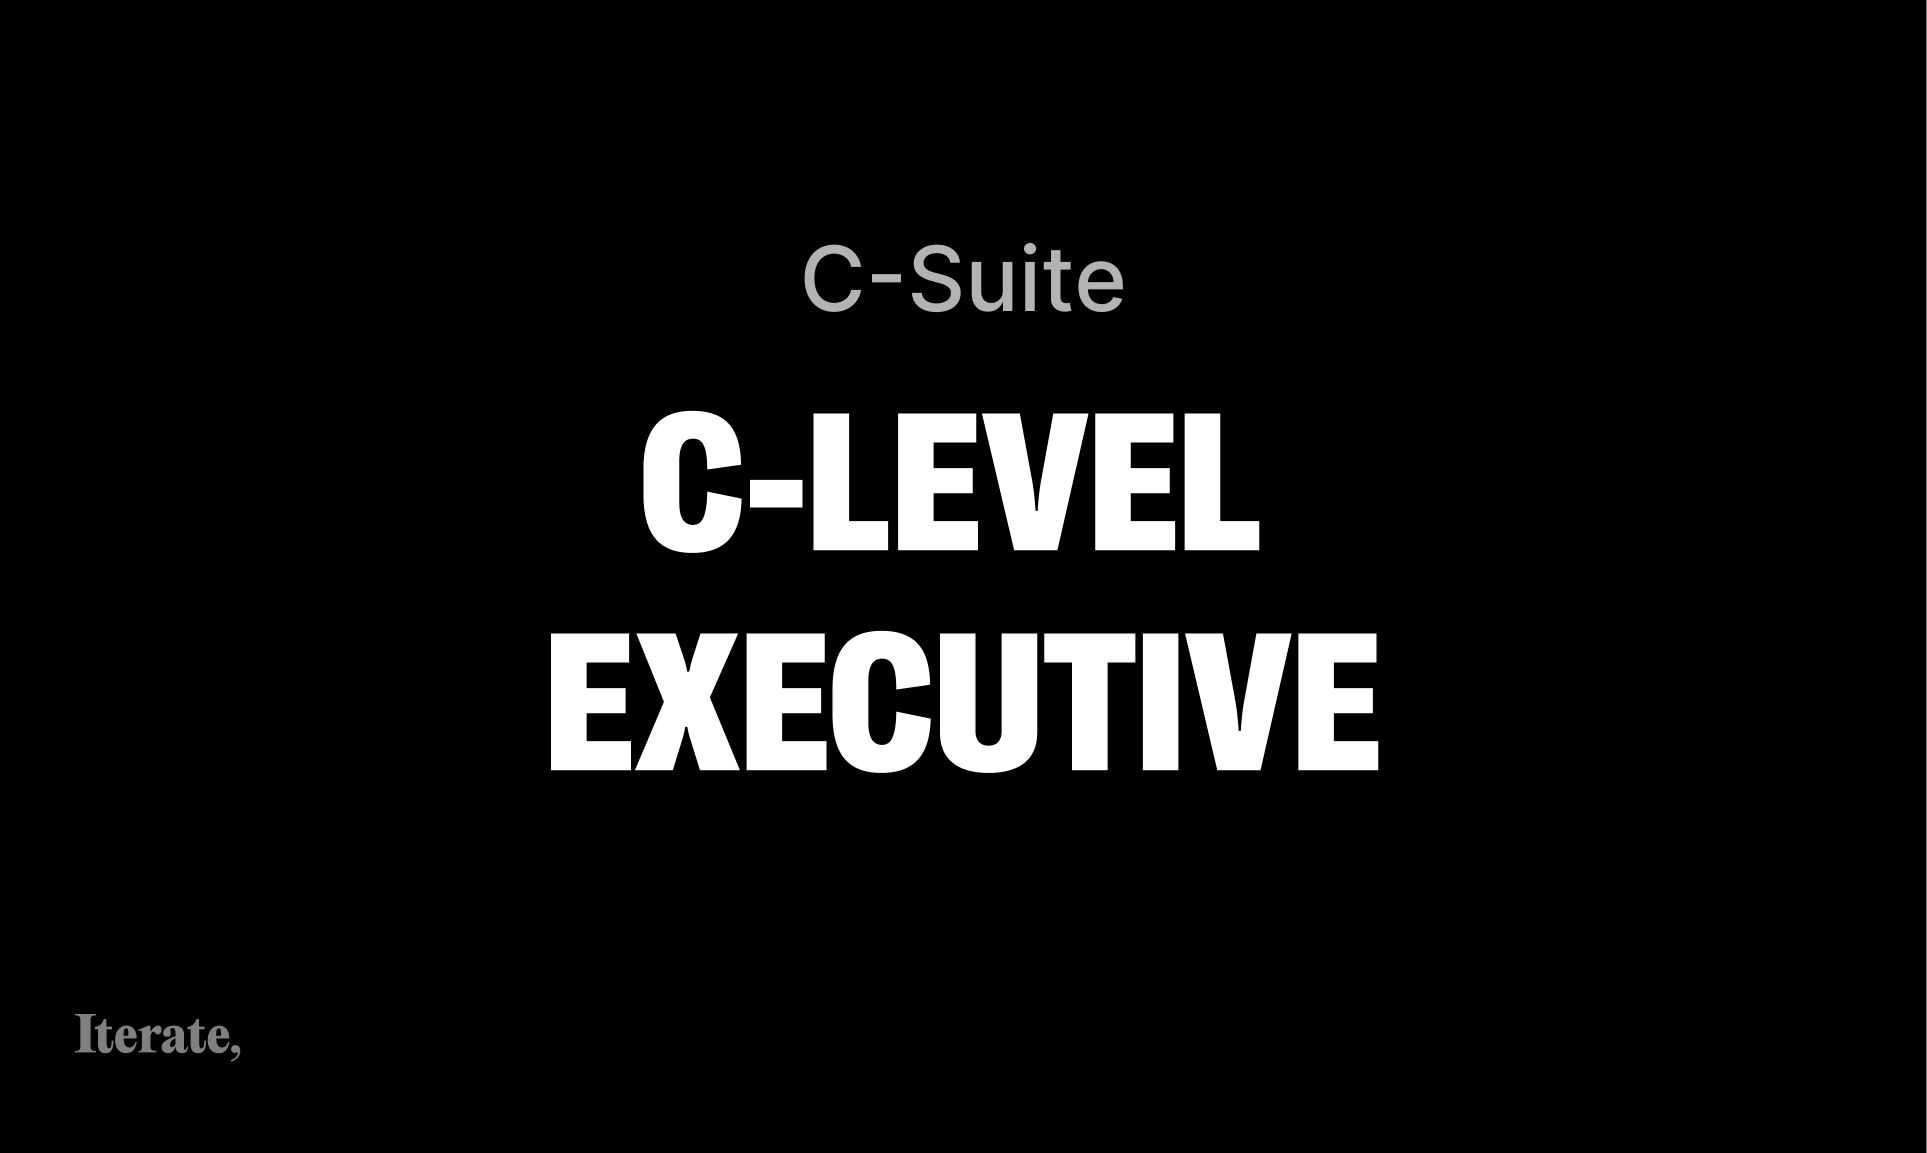 C-Suite Selling: 5 Surprising Strategies for Selling to Executives